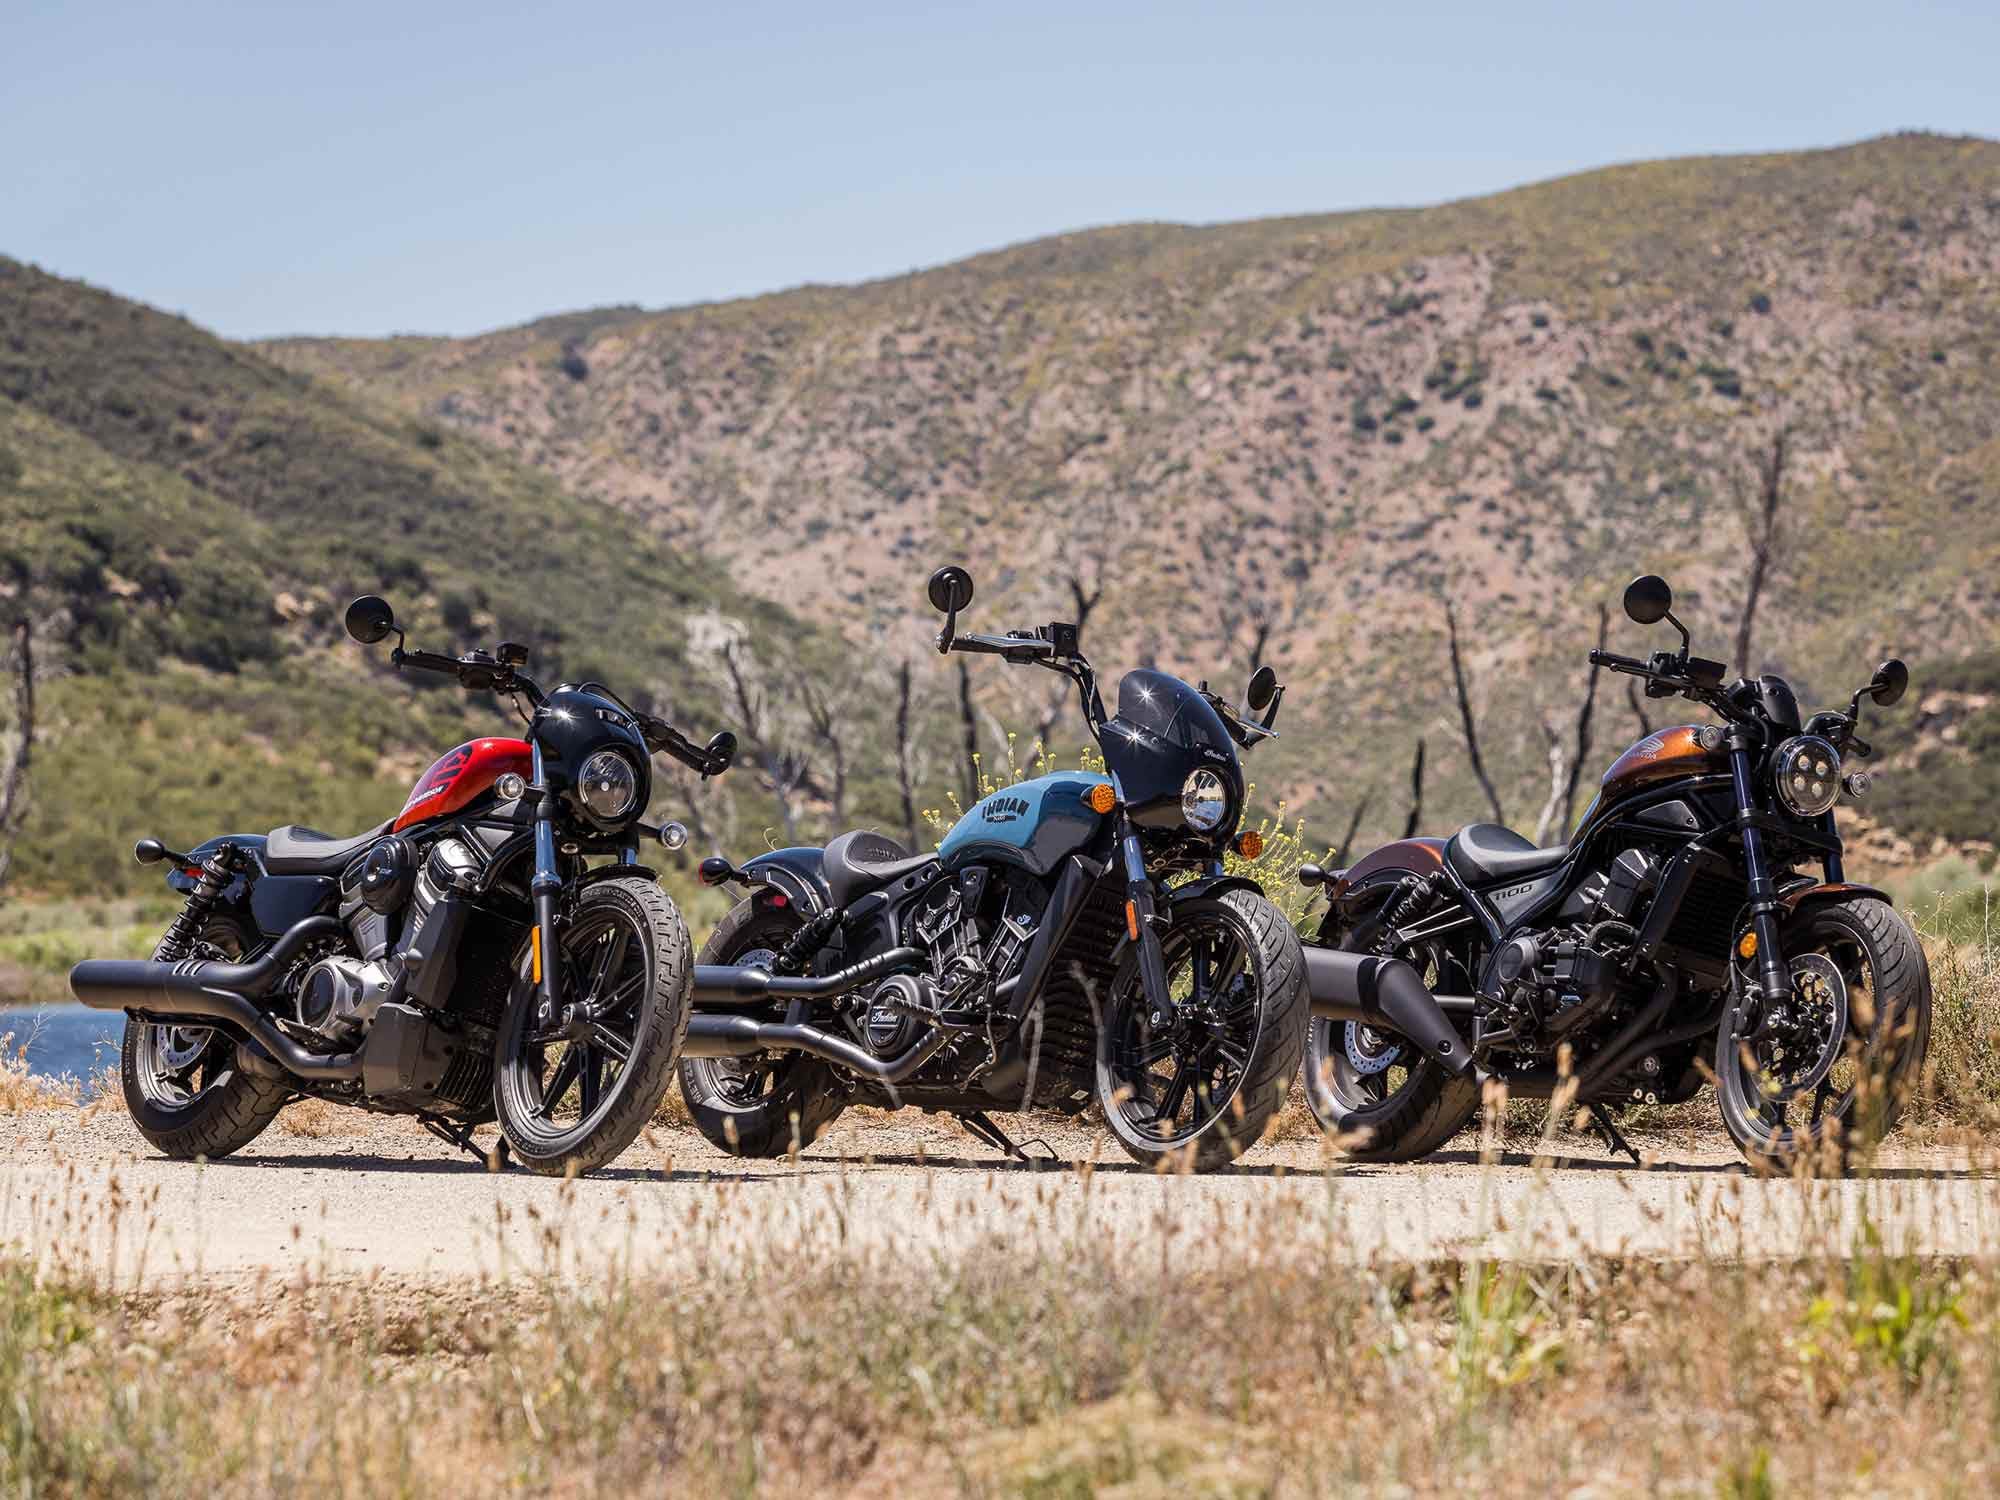 2022 Harley-Davidson Nightster, Indian Scout Rogue, and Honda Rebel 1100 DCT.